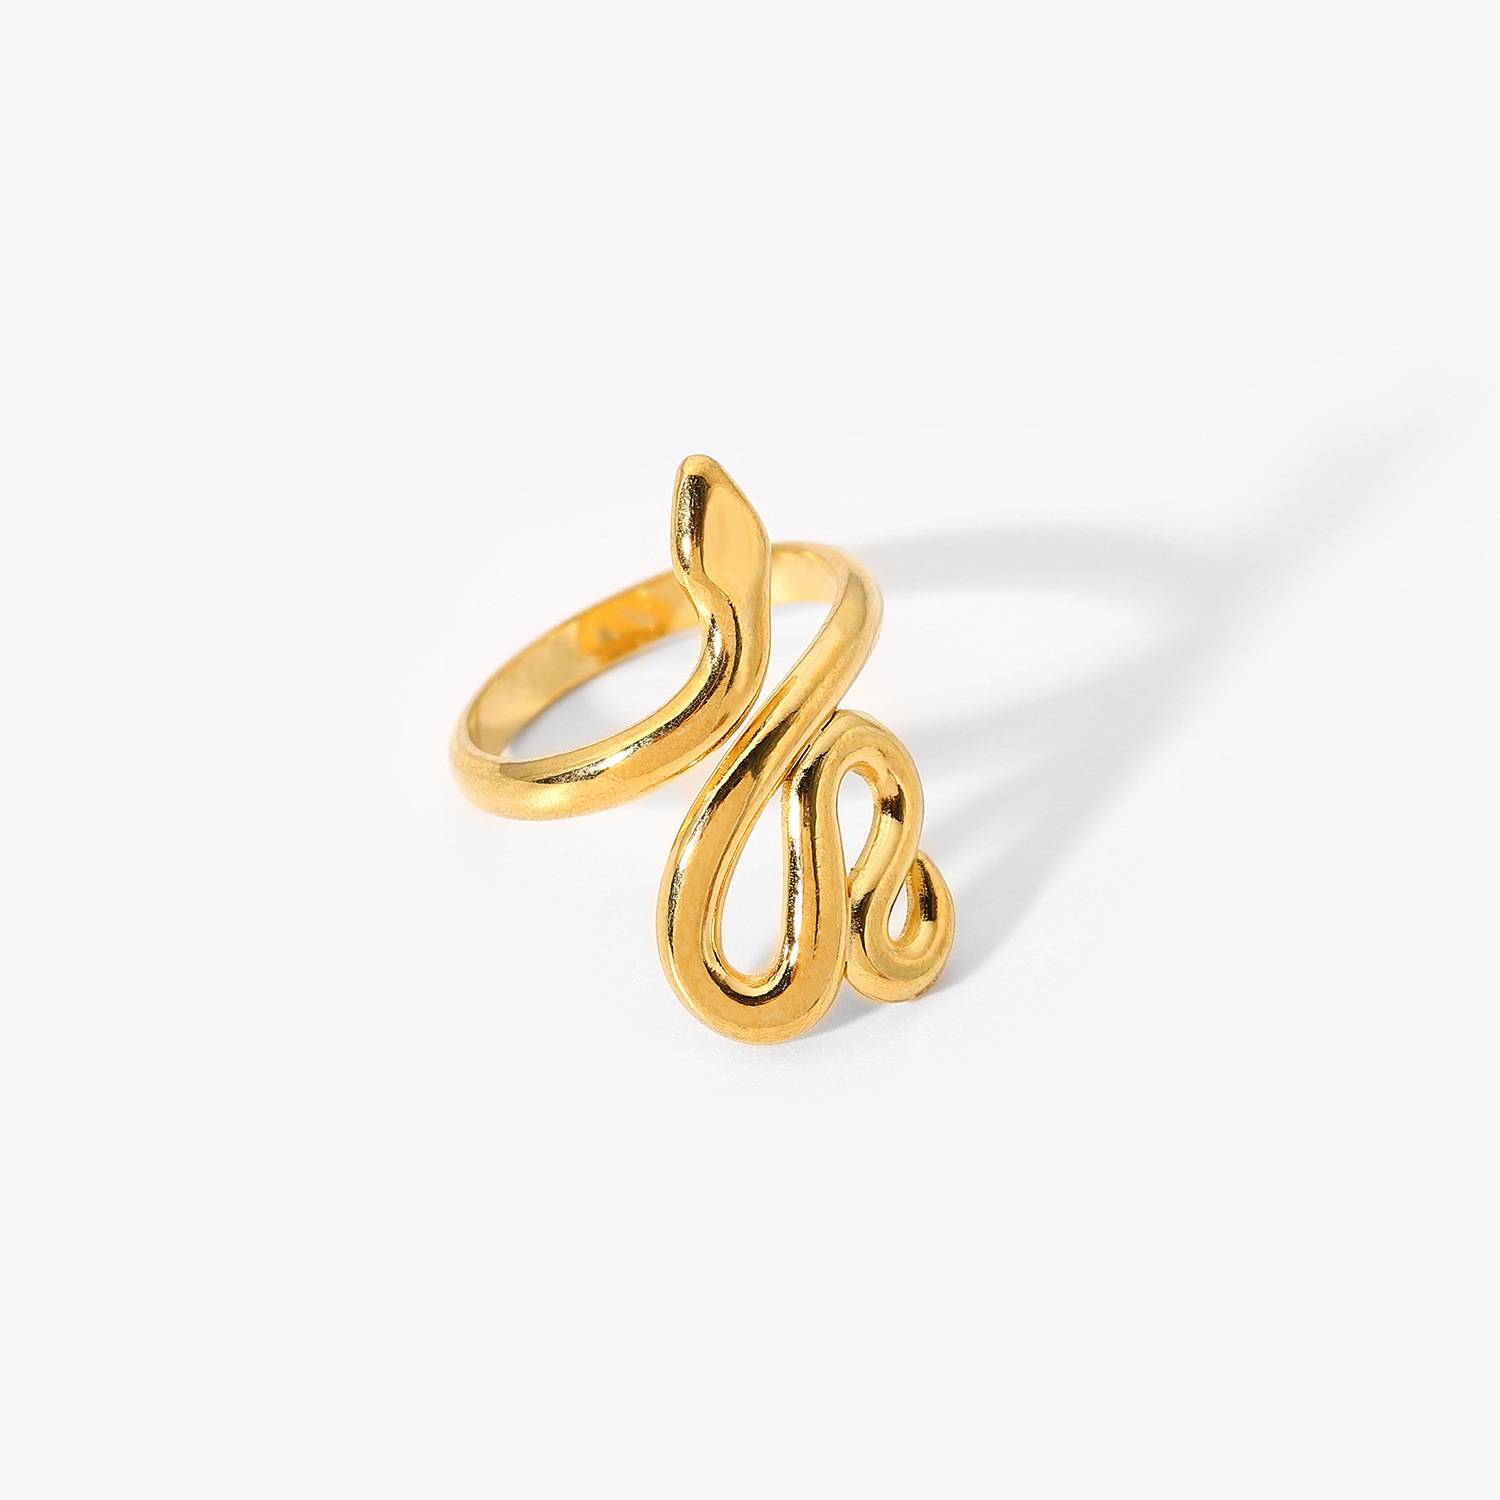 Fashion Cheap Stainless Steel Rings Jewelry 18k Gold Punk Snake Open Adjustable Rings Statement Chunky Gold Rings Women Female